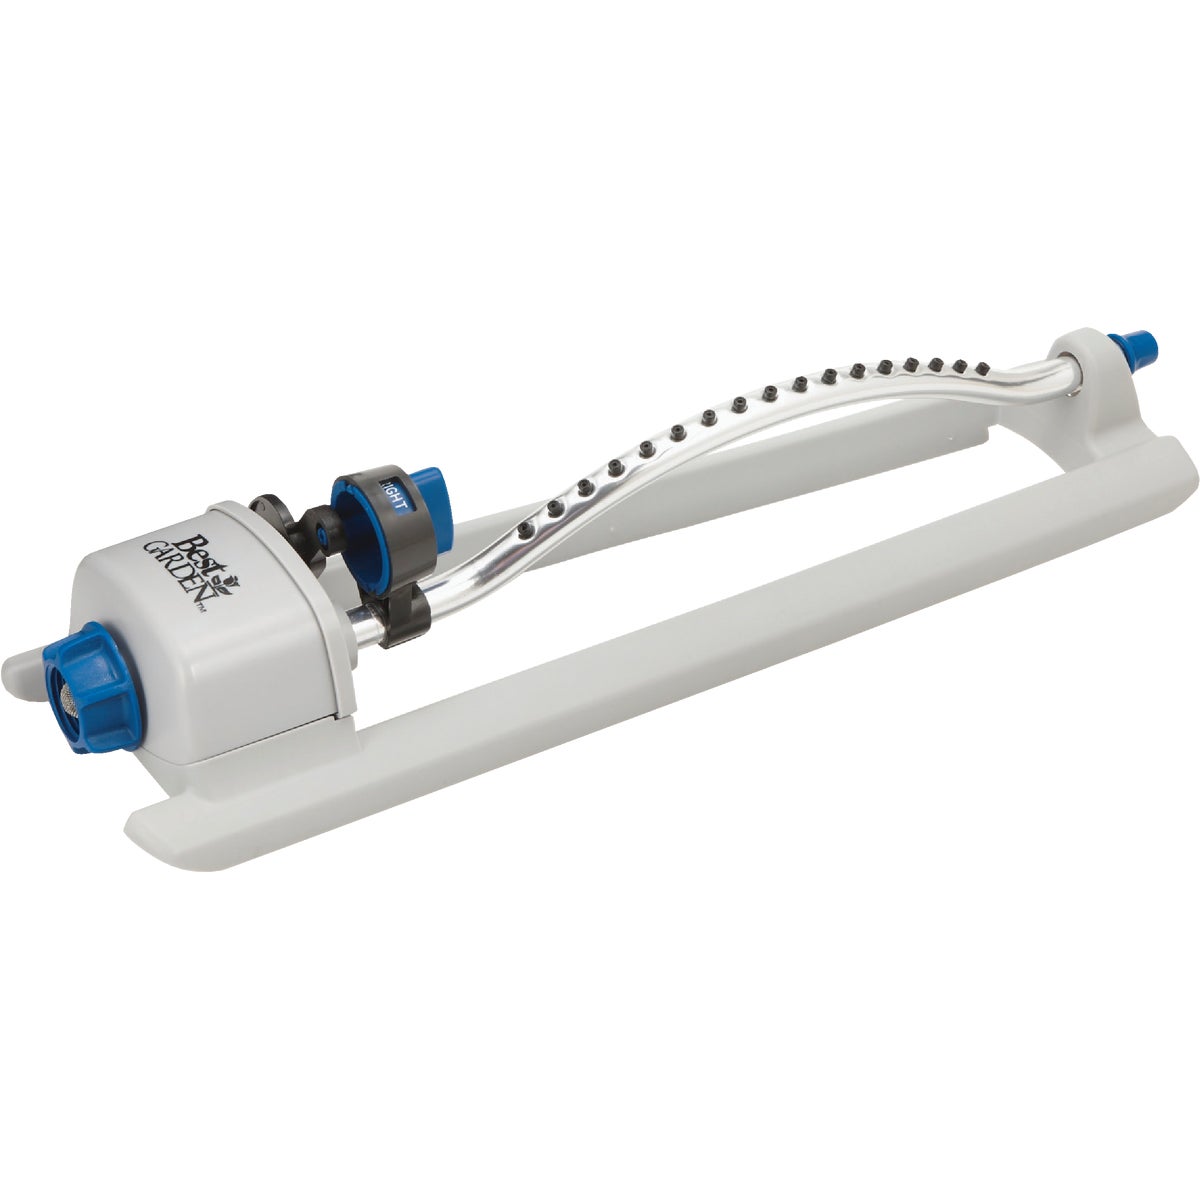 Item 757140, Poly oscillating sprinkler ideal for watering large, rectangular areas.